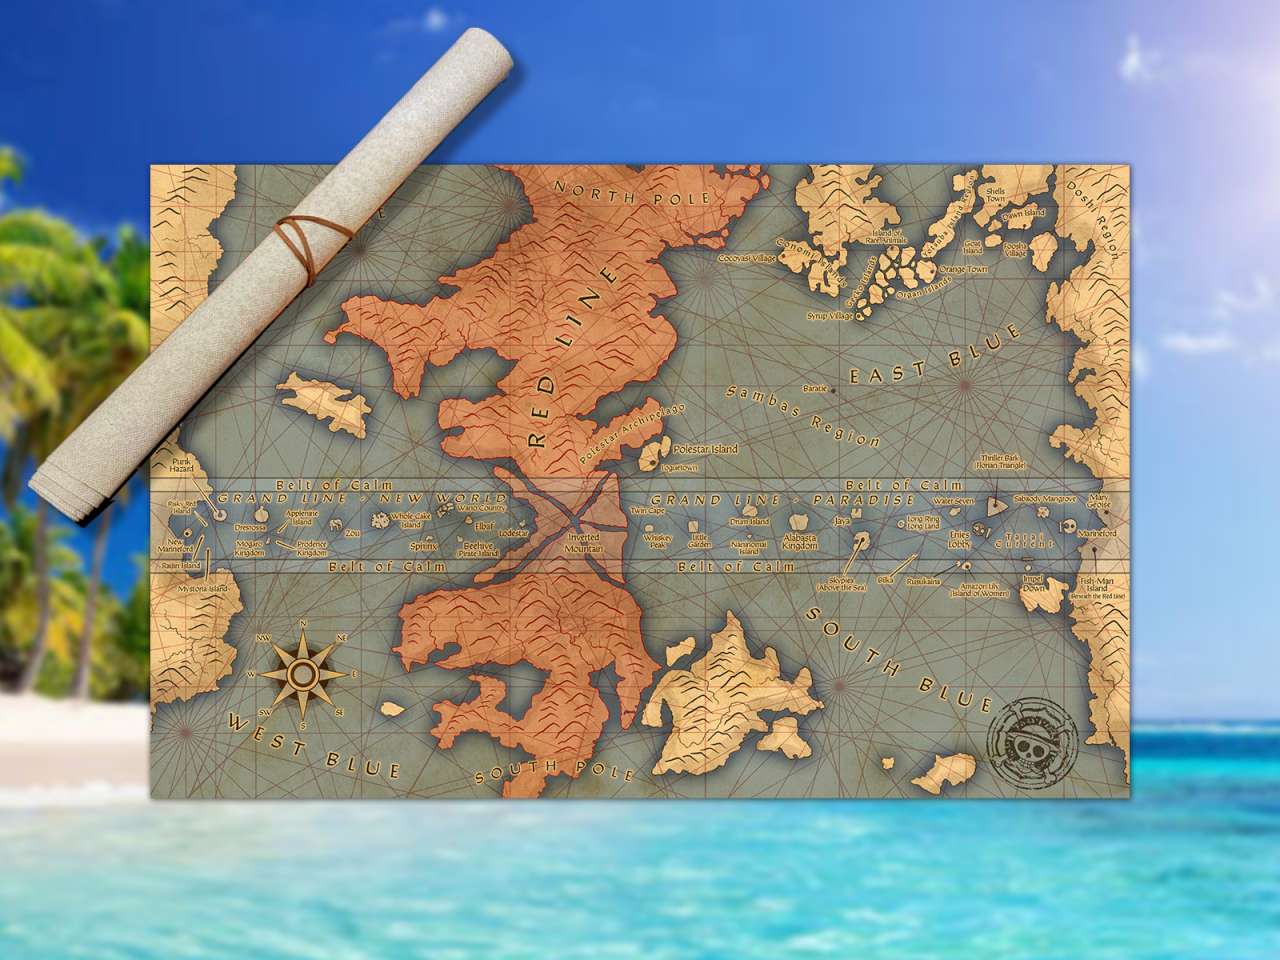 The World Map of One Piece 